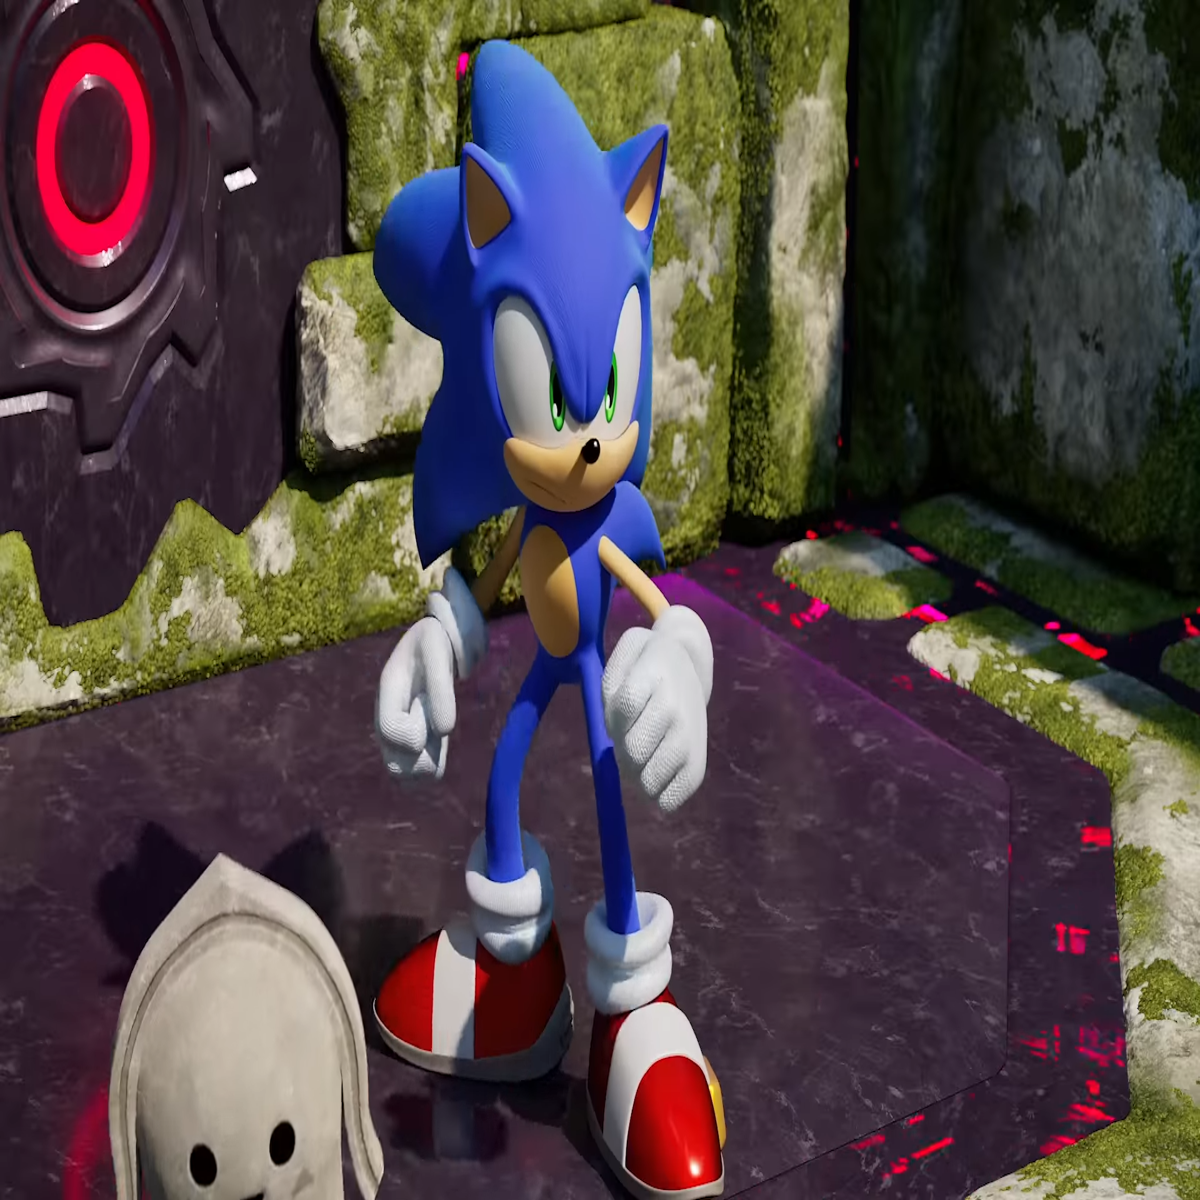 Sega details Sonic Frontiers features and gameplay